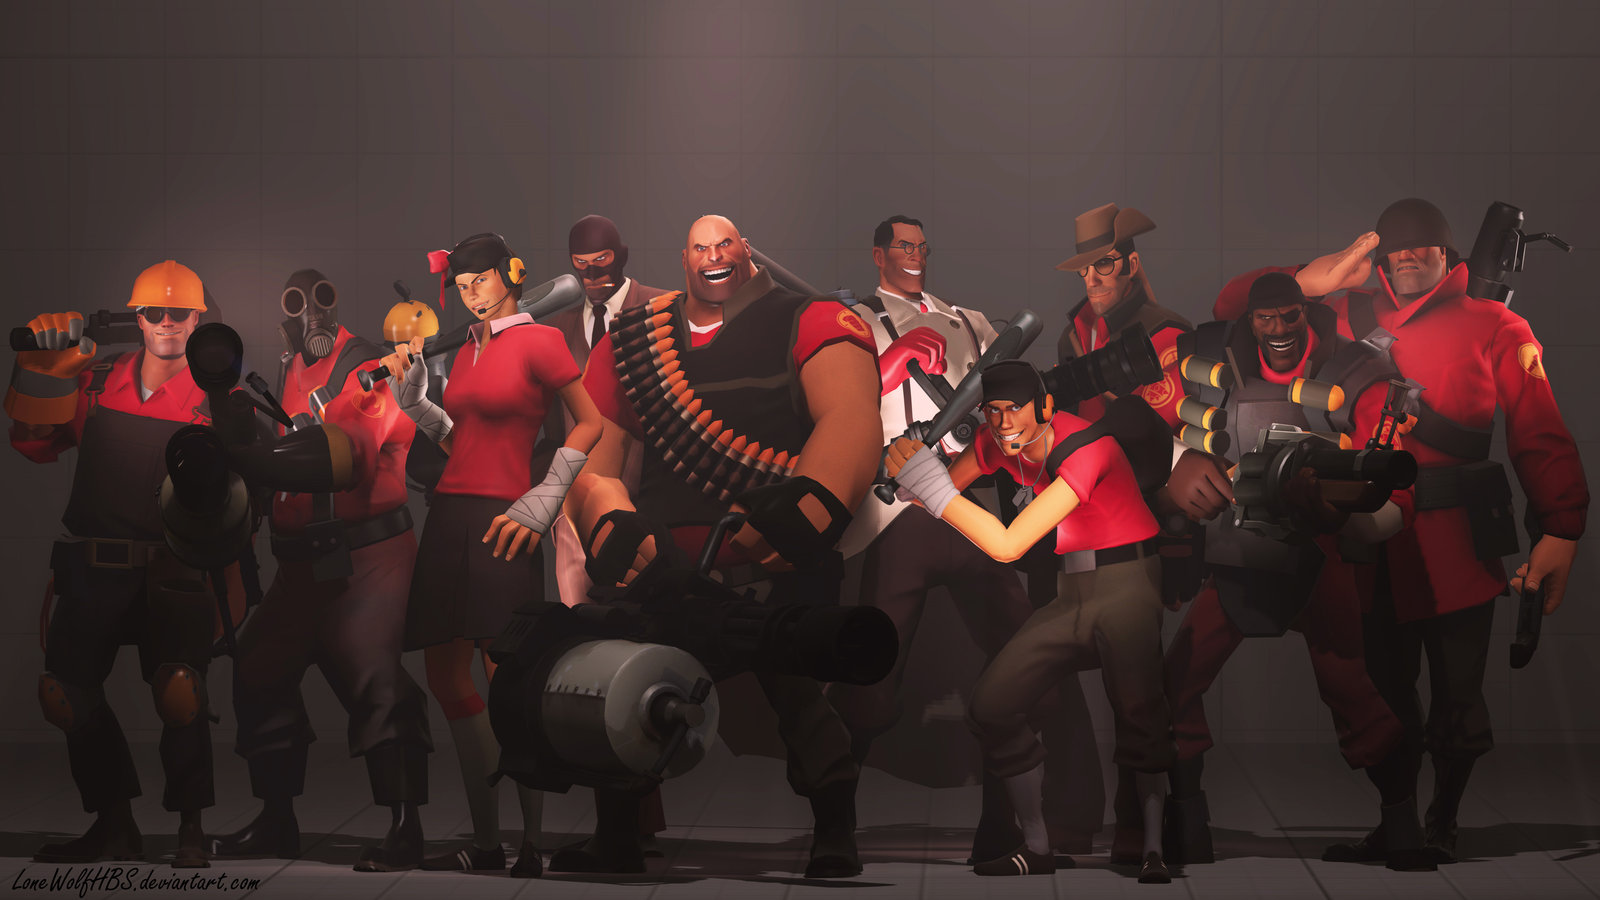 Team 02. Team Fortress 2. Team Fortress 2 Red. Tf2. Tf2 all class.